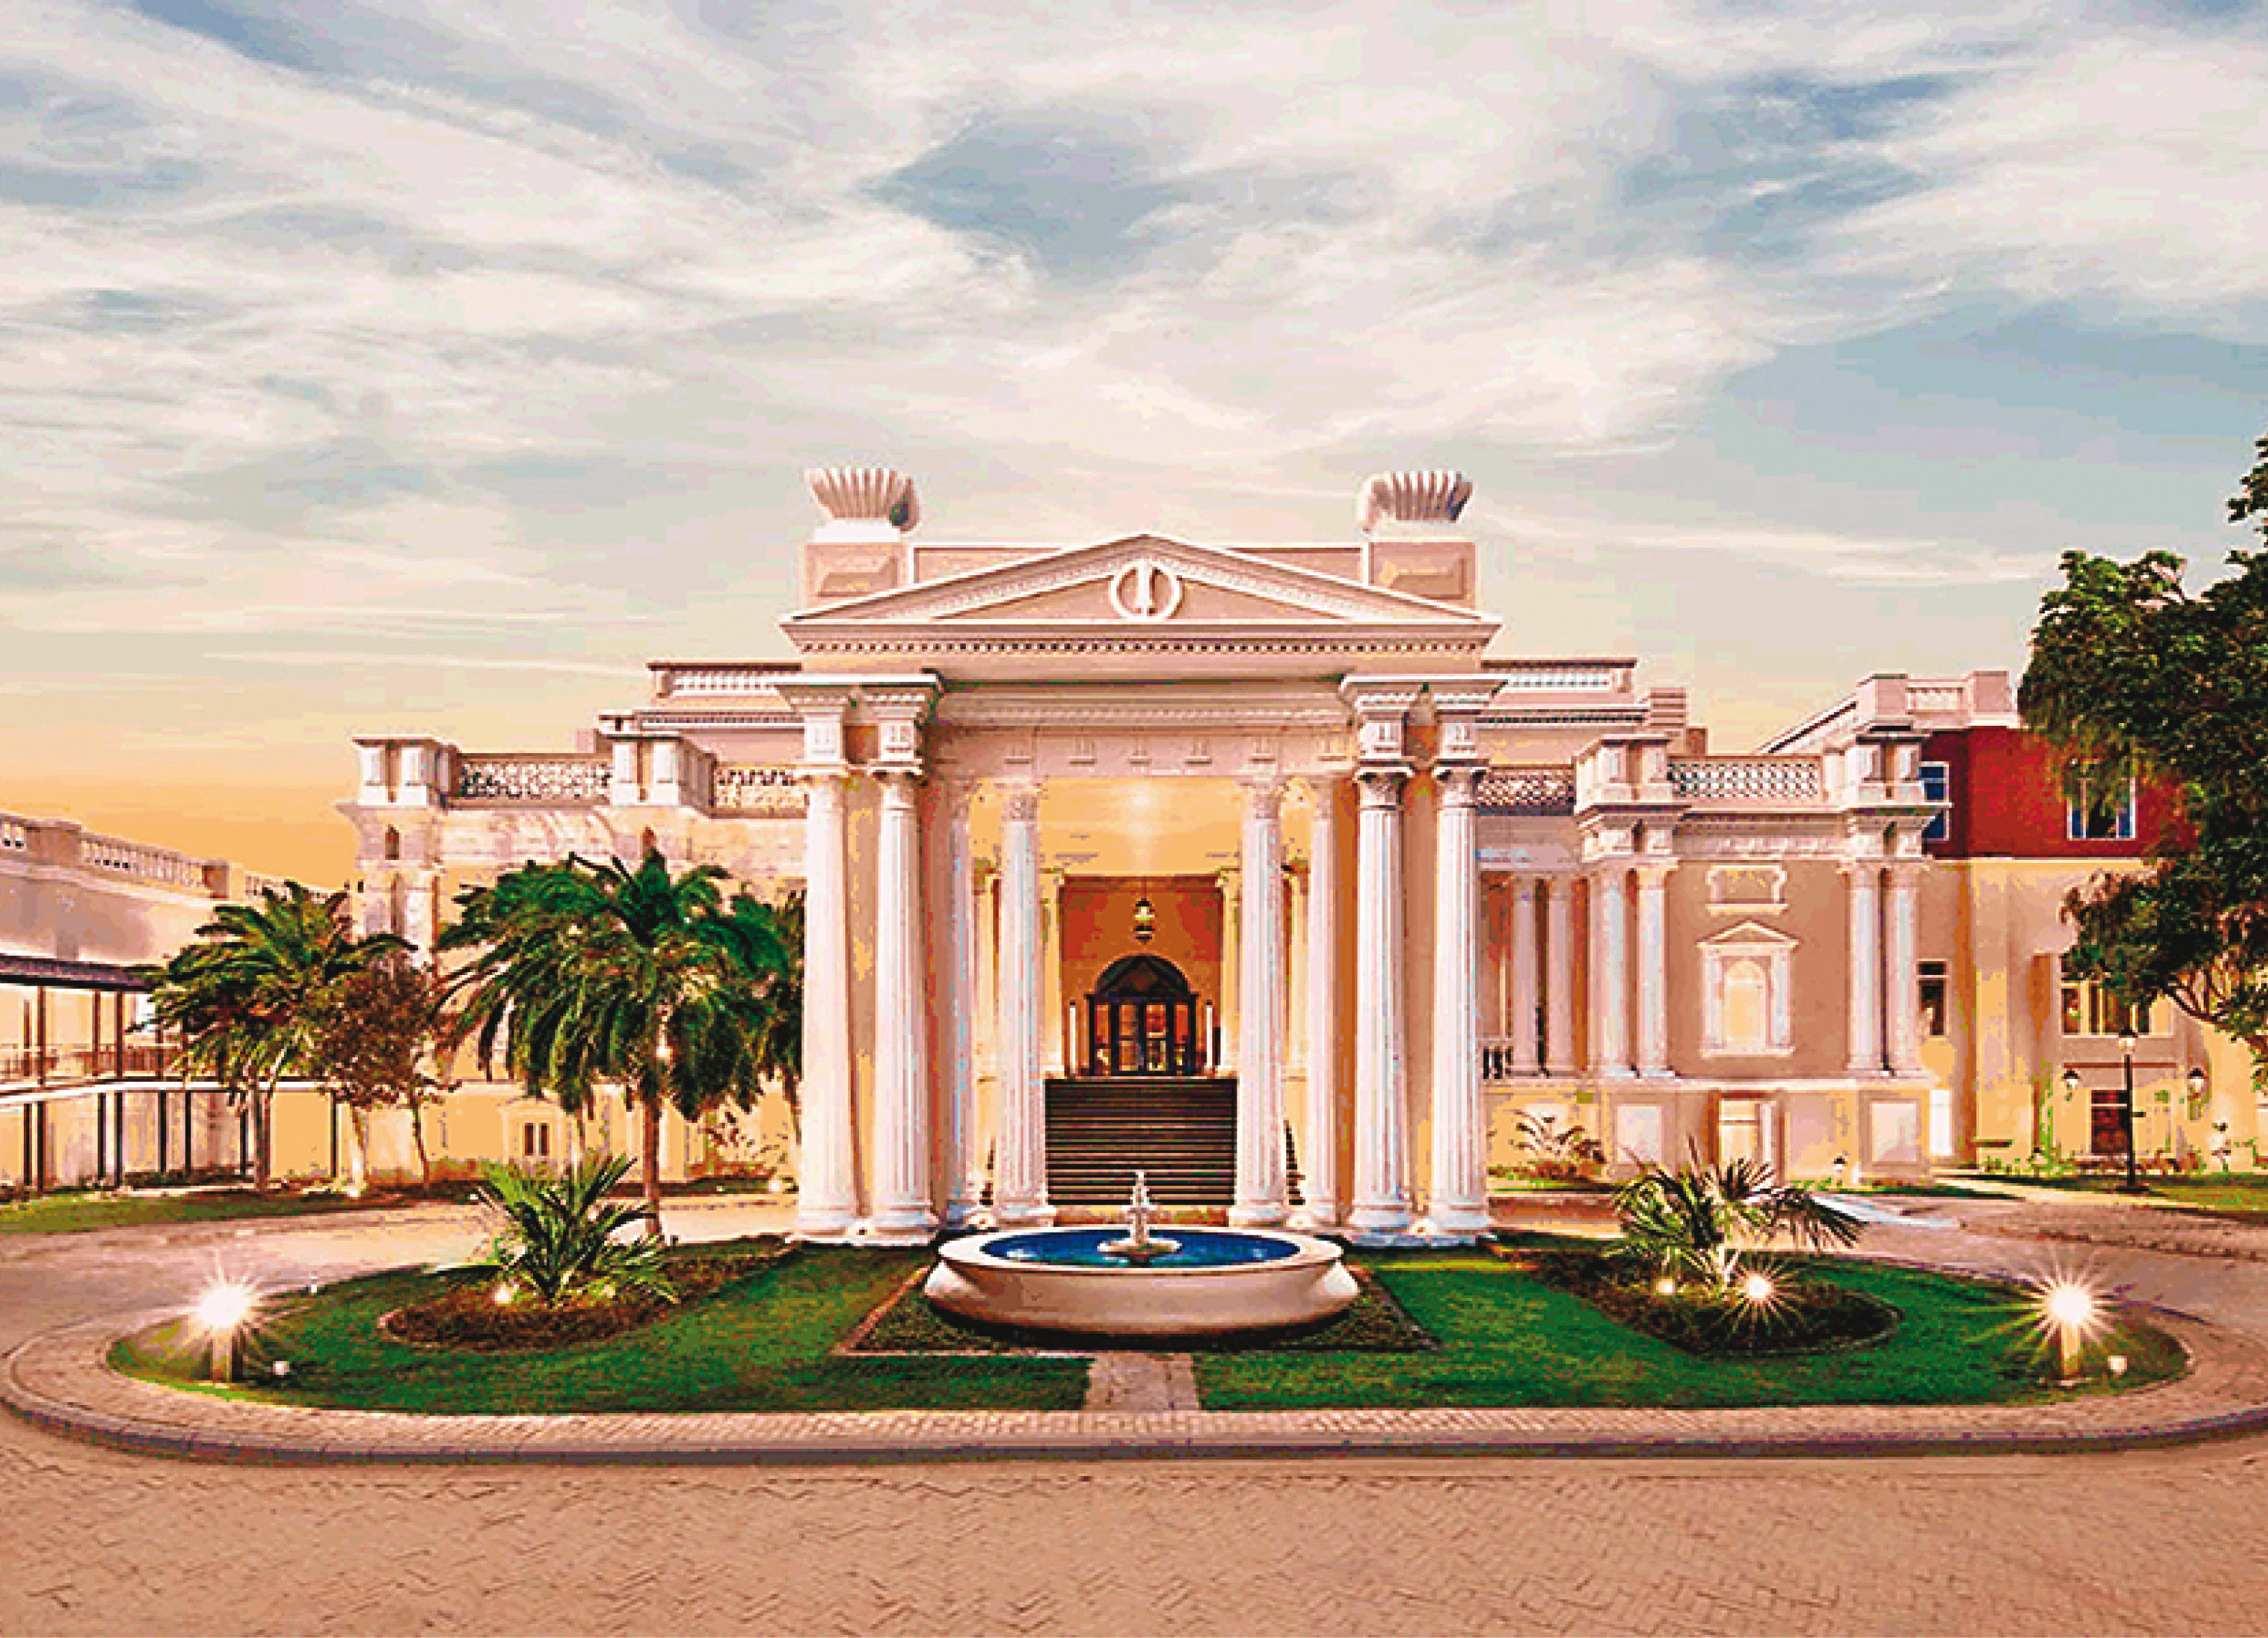 Amritsar’s Rajasansi Haveli, the last great Punjabi haveli on this side of the border, is now being run as an ITC Hotel